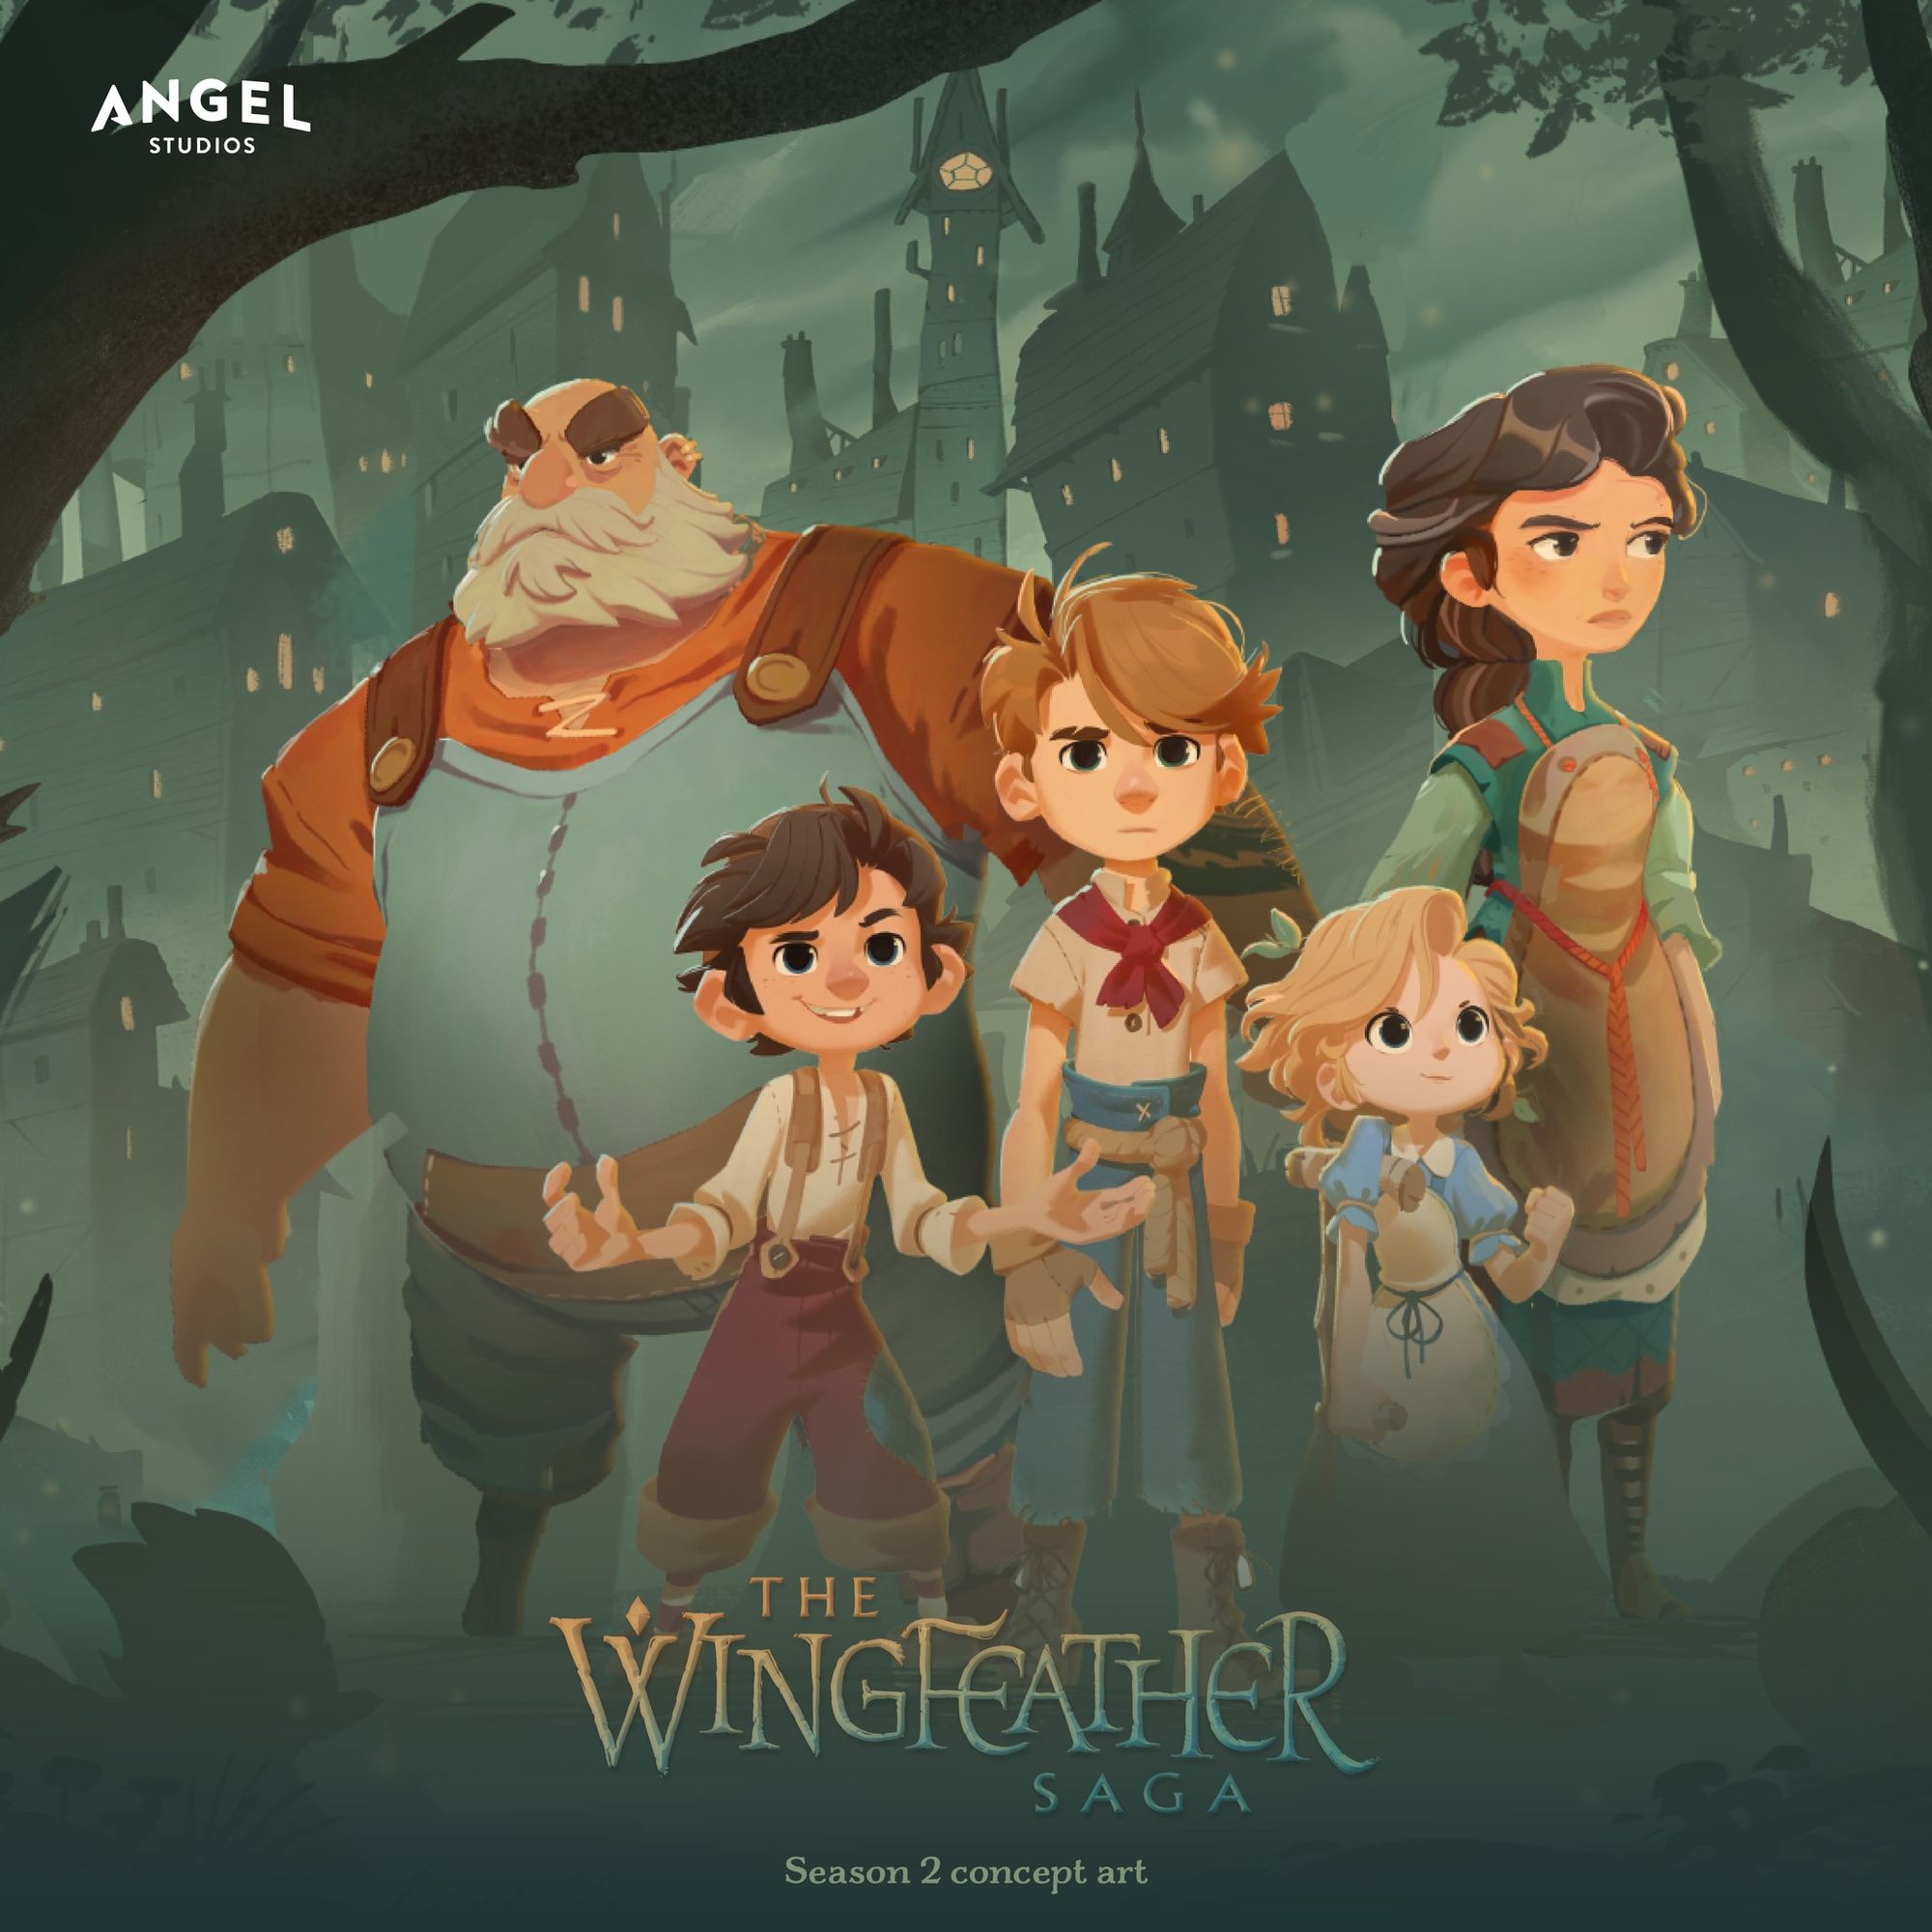 Charming Highly Anticipated Wingfeather Saga Comes to Angel Studios